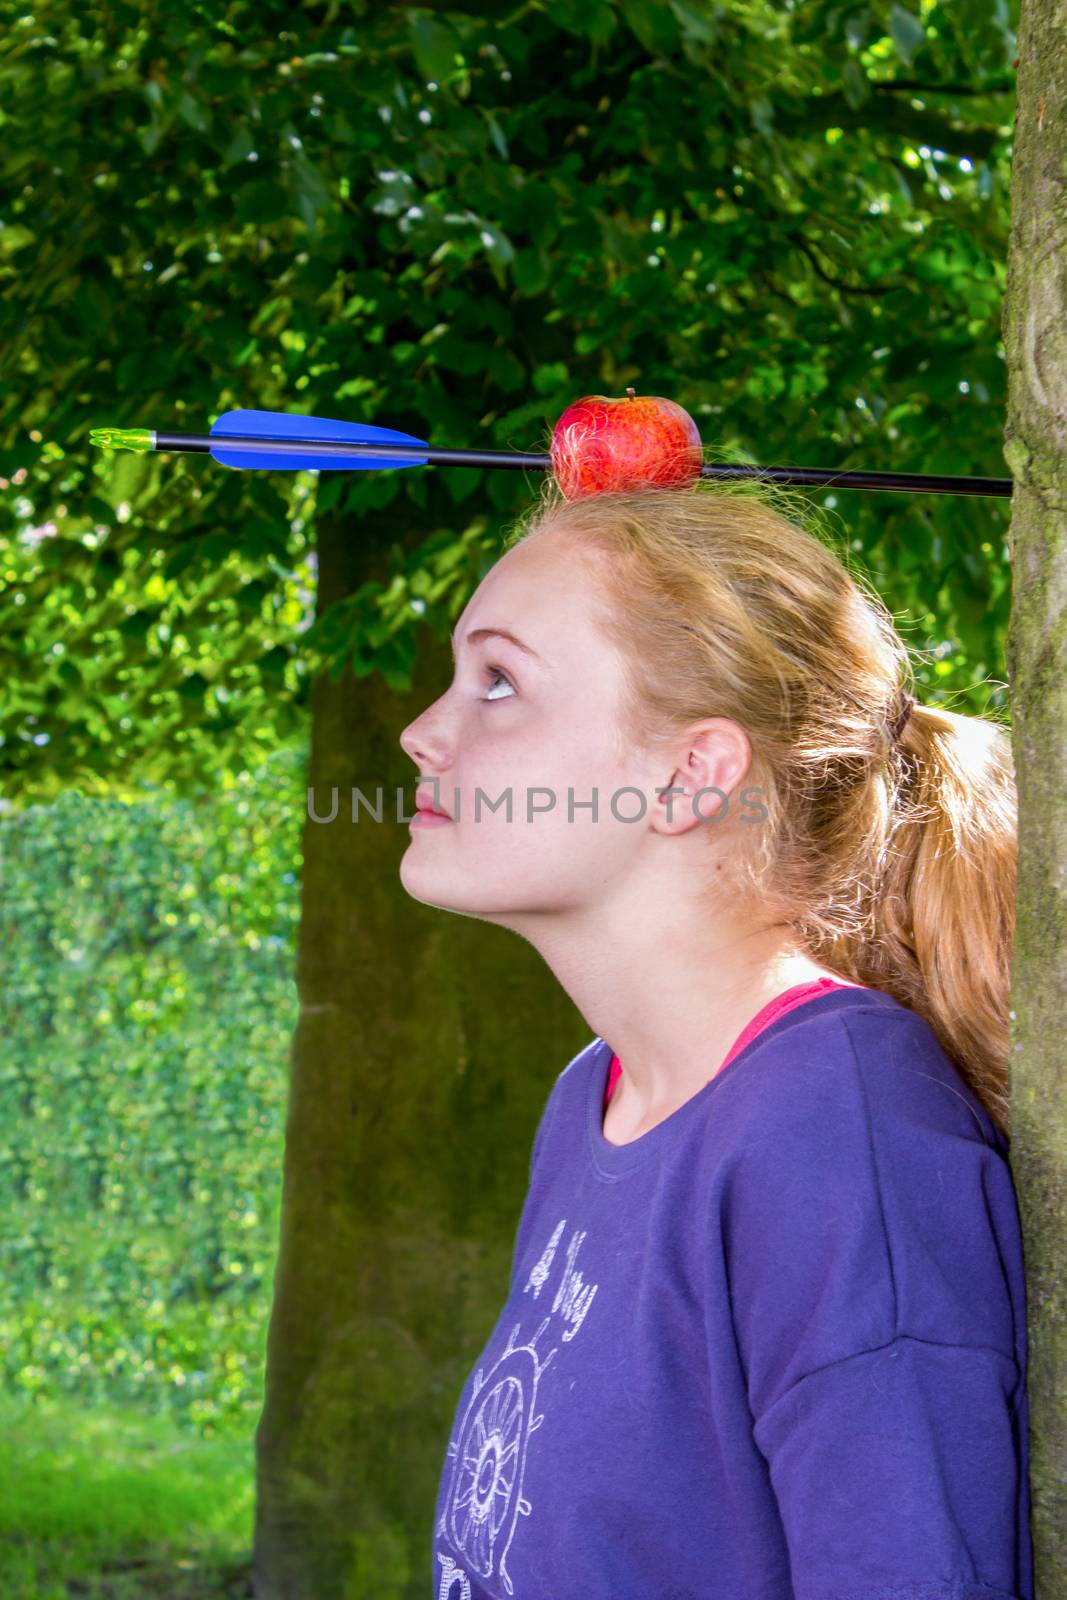 Girl with apple and arrow on her head by BenSchonewille